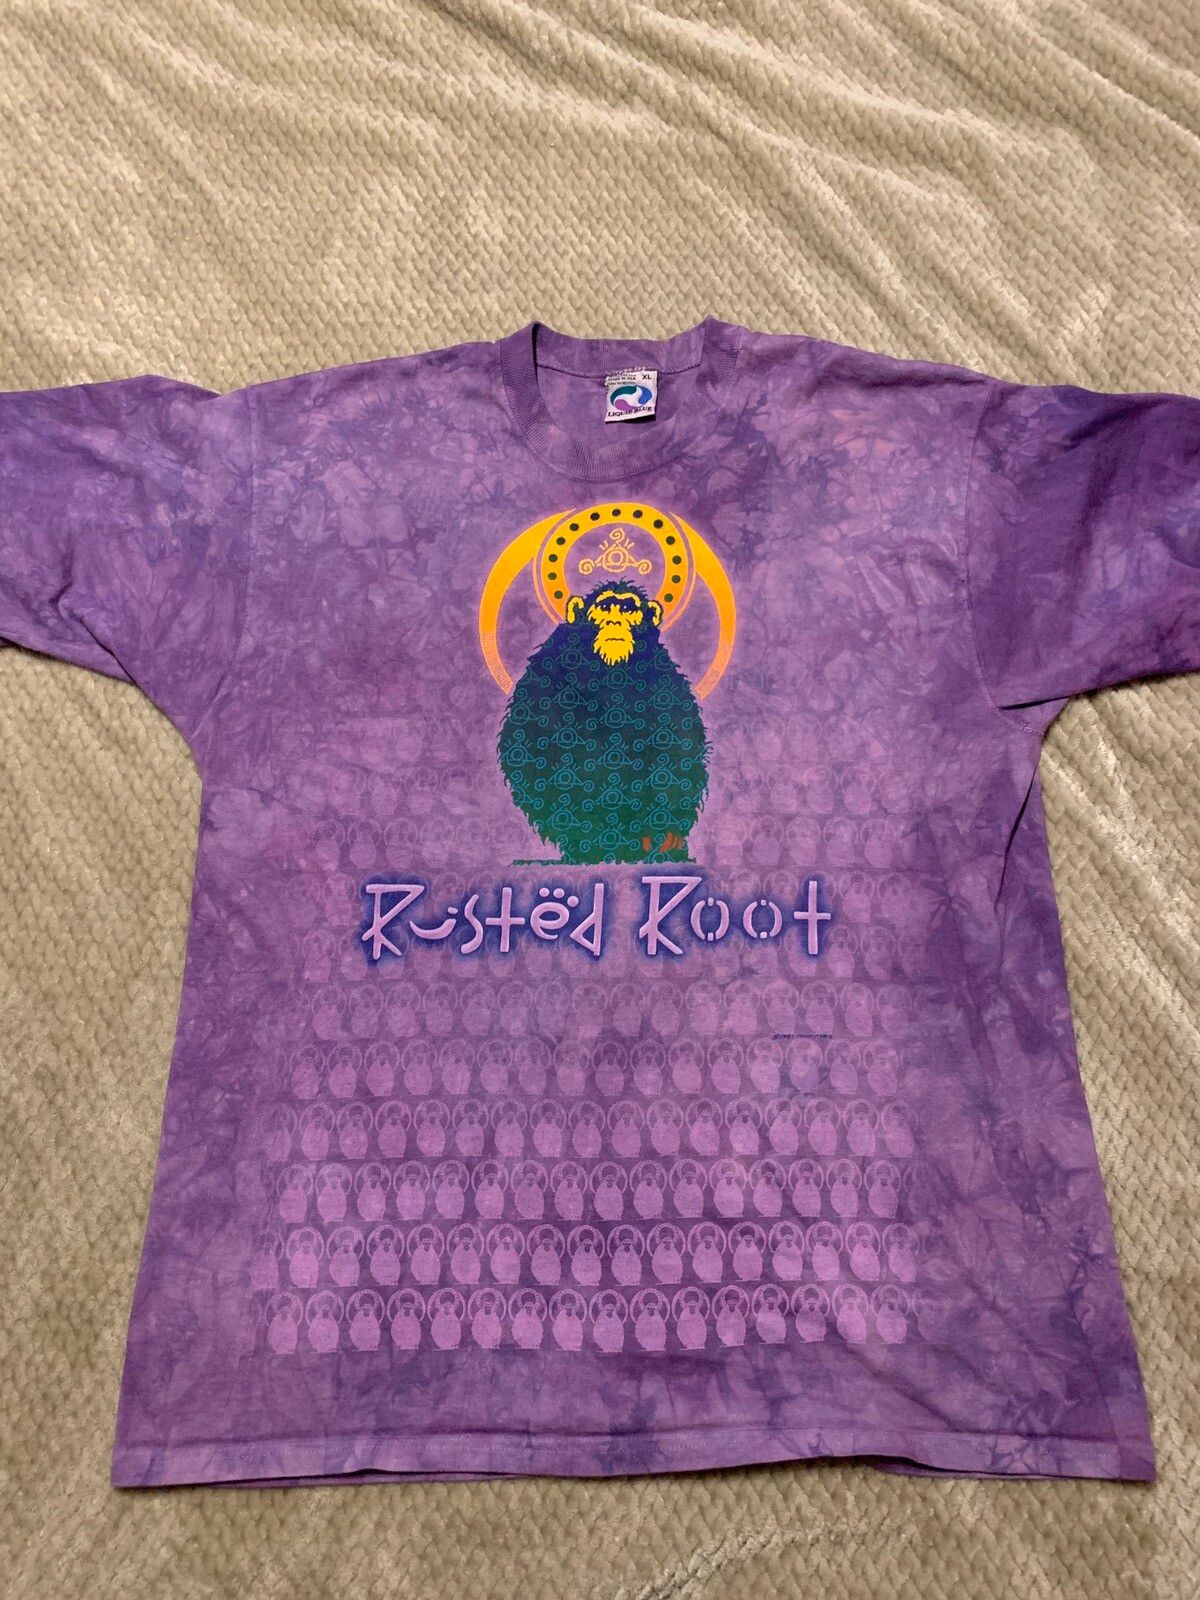 Vintage 1997 Rusted Root tour shirt liquid blue tag made in USA Size US XL / EU 56 / 4 - 1 Preview